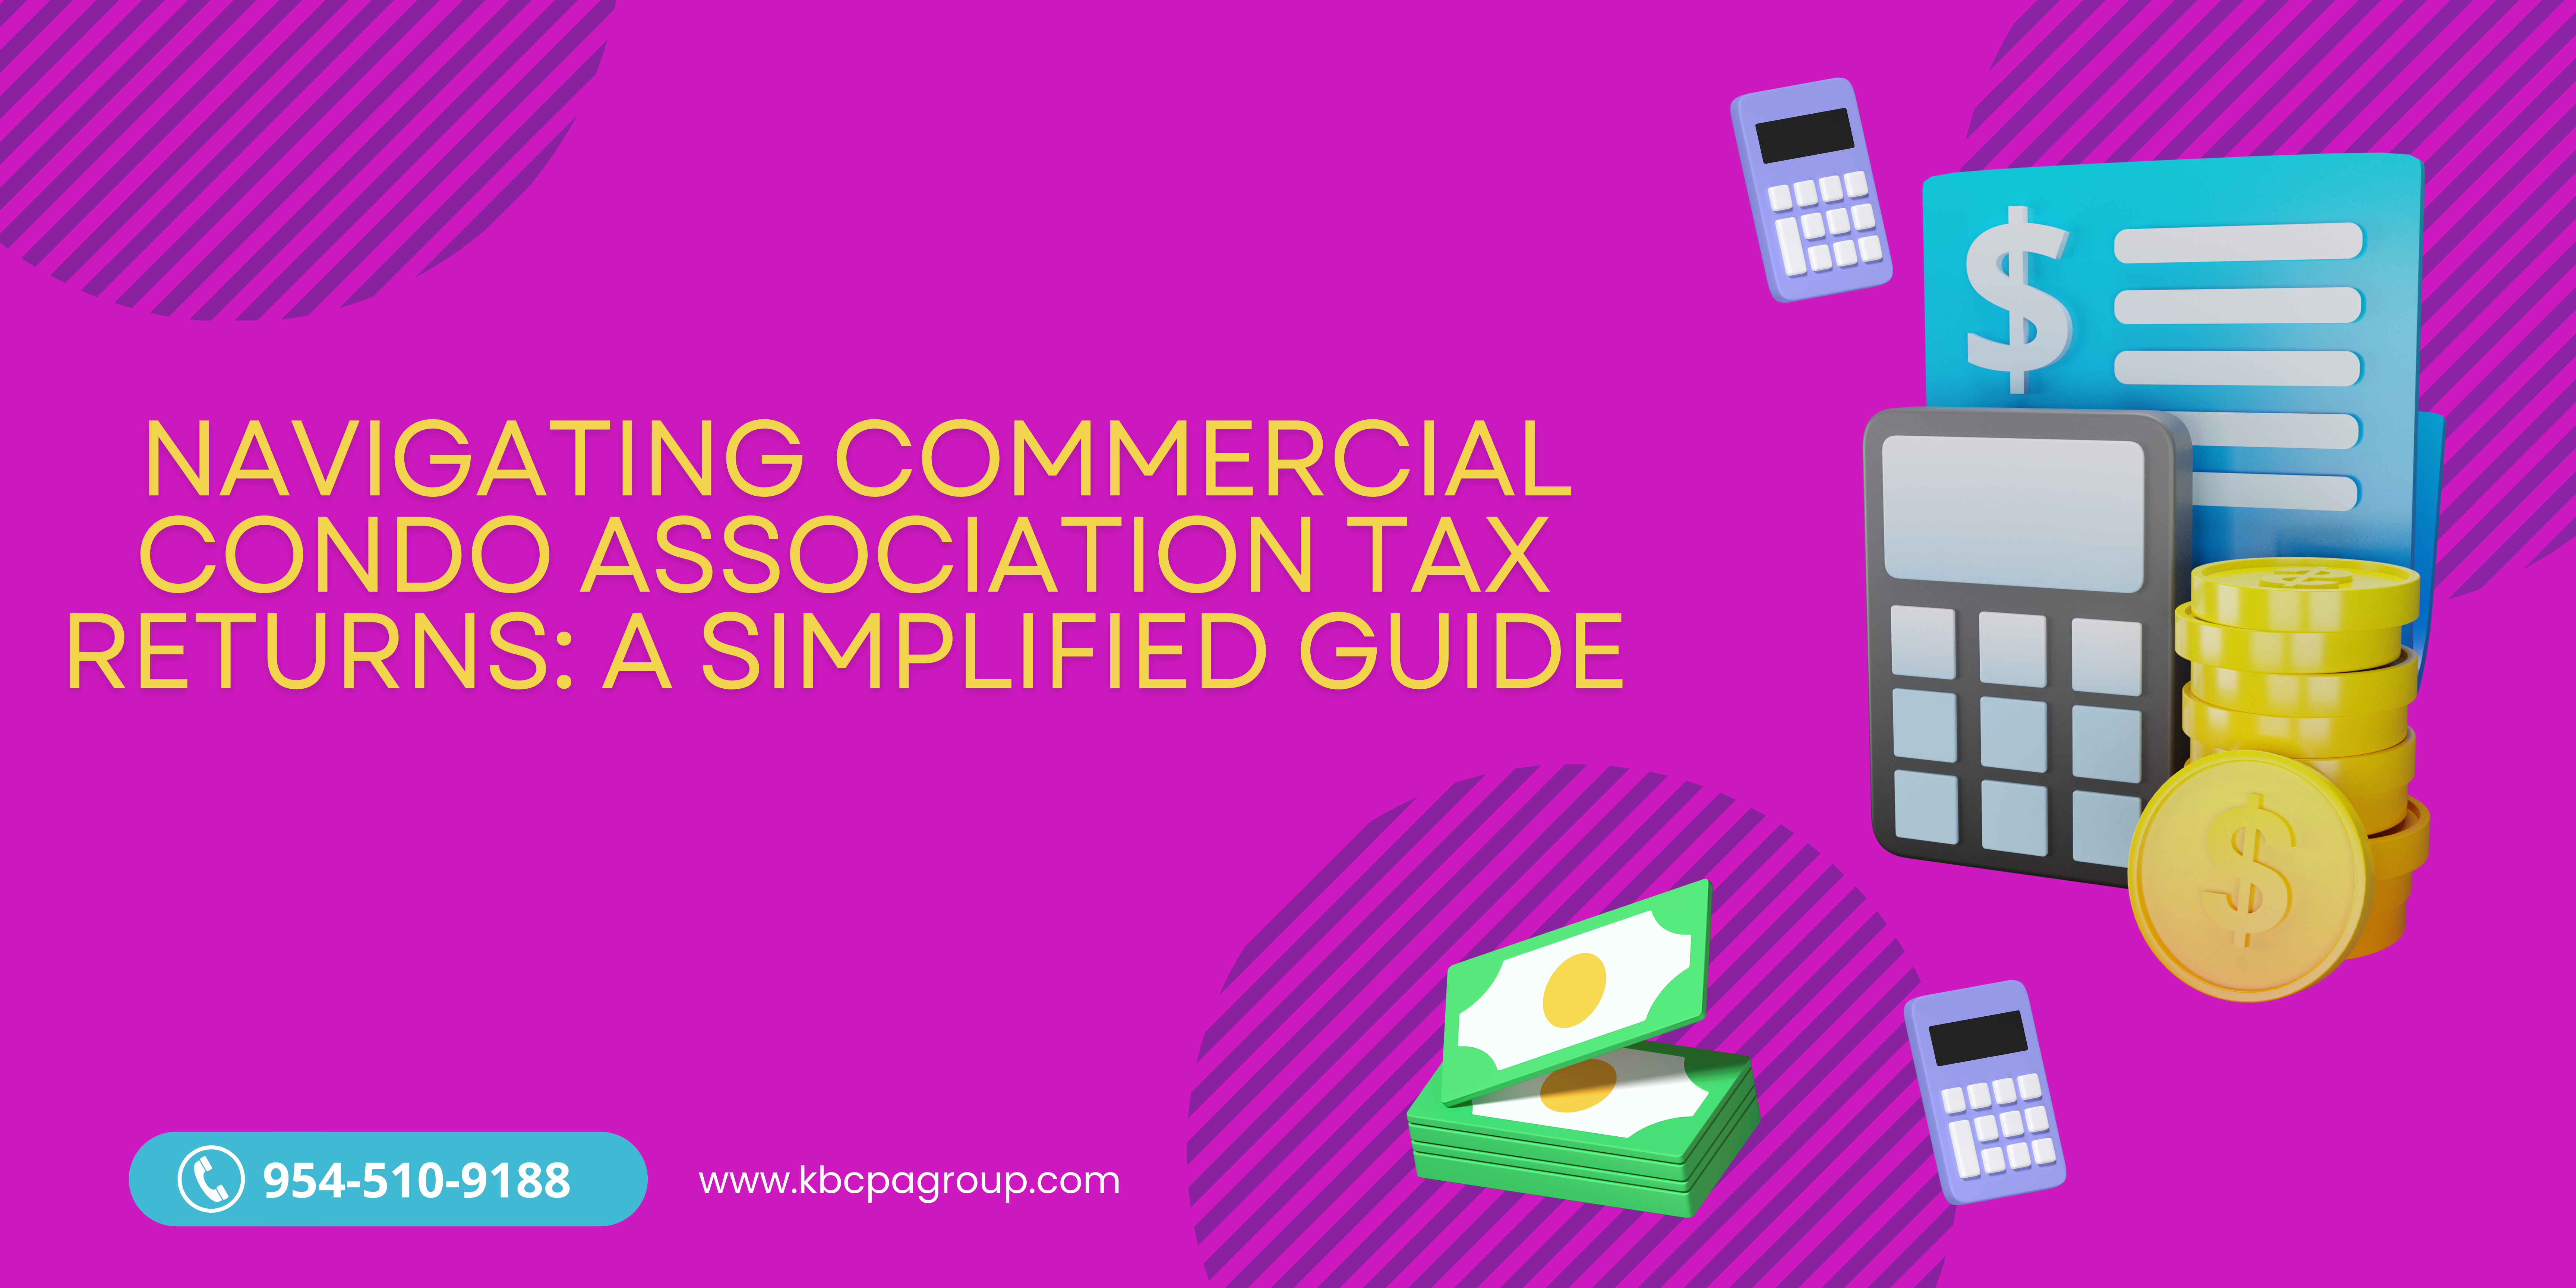 Navigating Commercial Condo Association Tax Returns A Simplified Guide